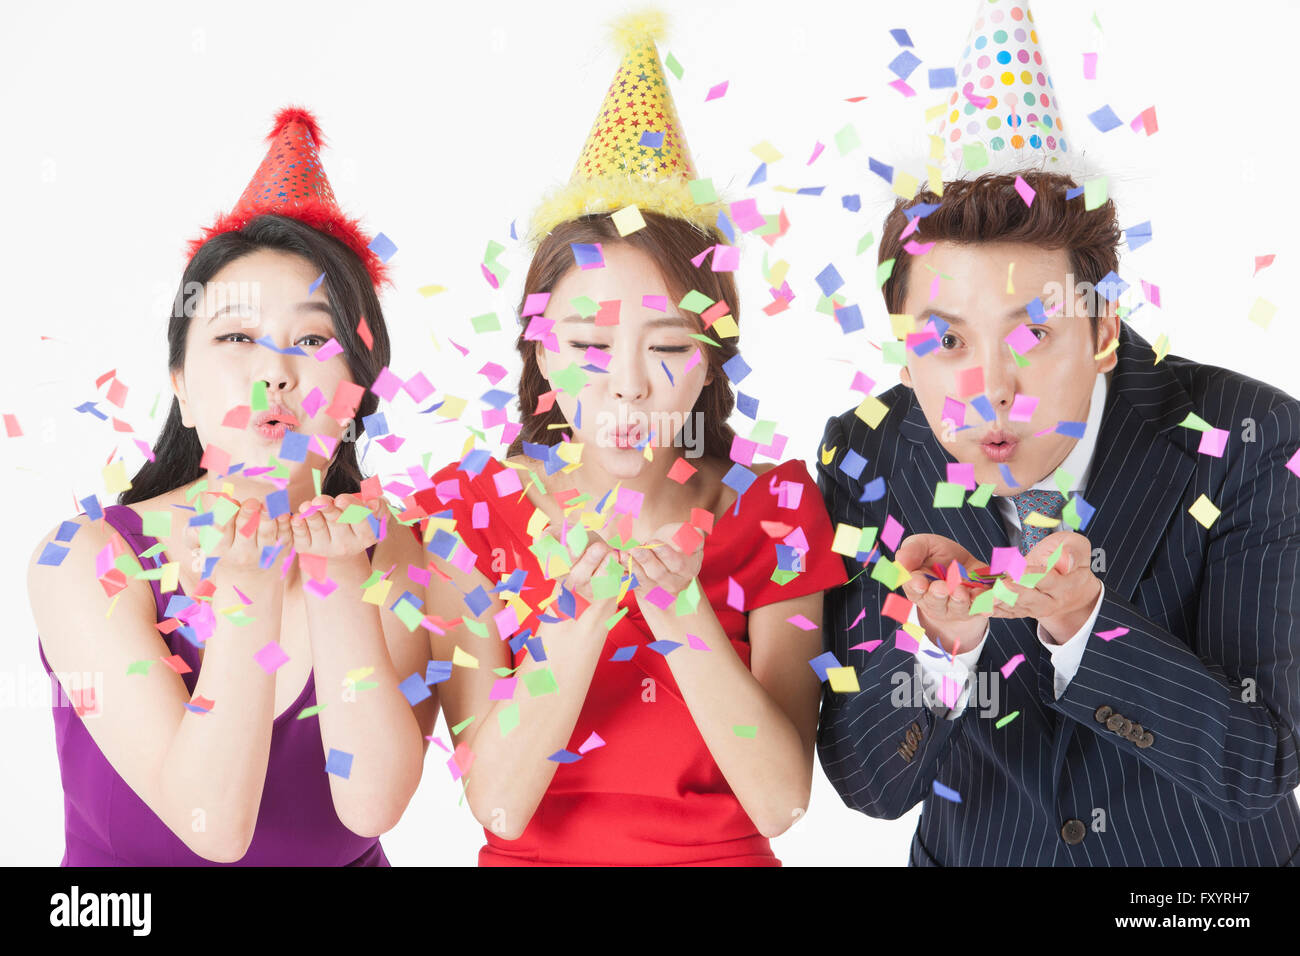 Portrait of three young people blowing confetti Stock Photo